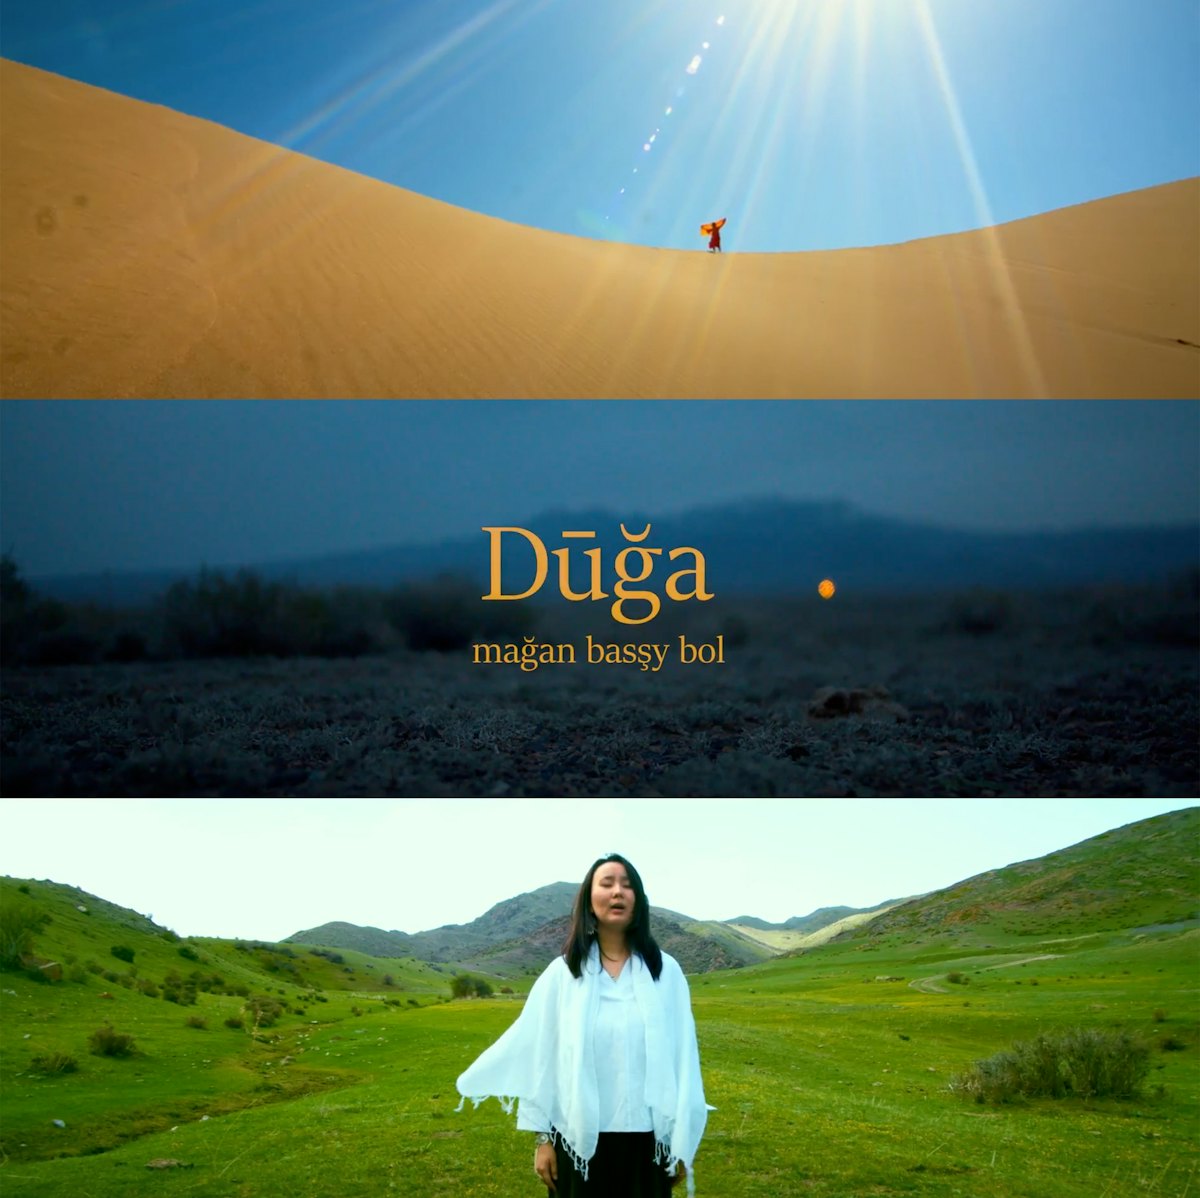 This video, to be played as an opening to the conferences in Kazakhstan, features a Baháʼí prayer sung in Kazakh, as the singer traverses across various environments and terrains.